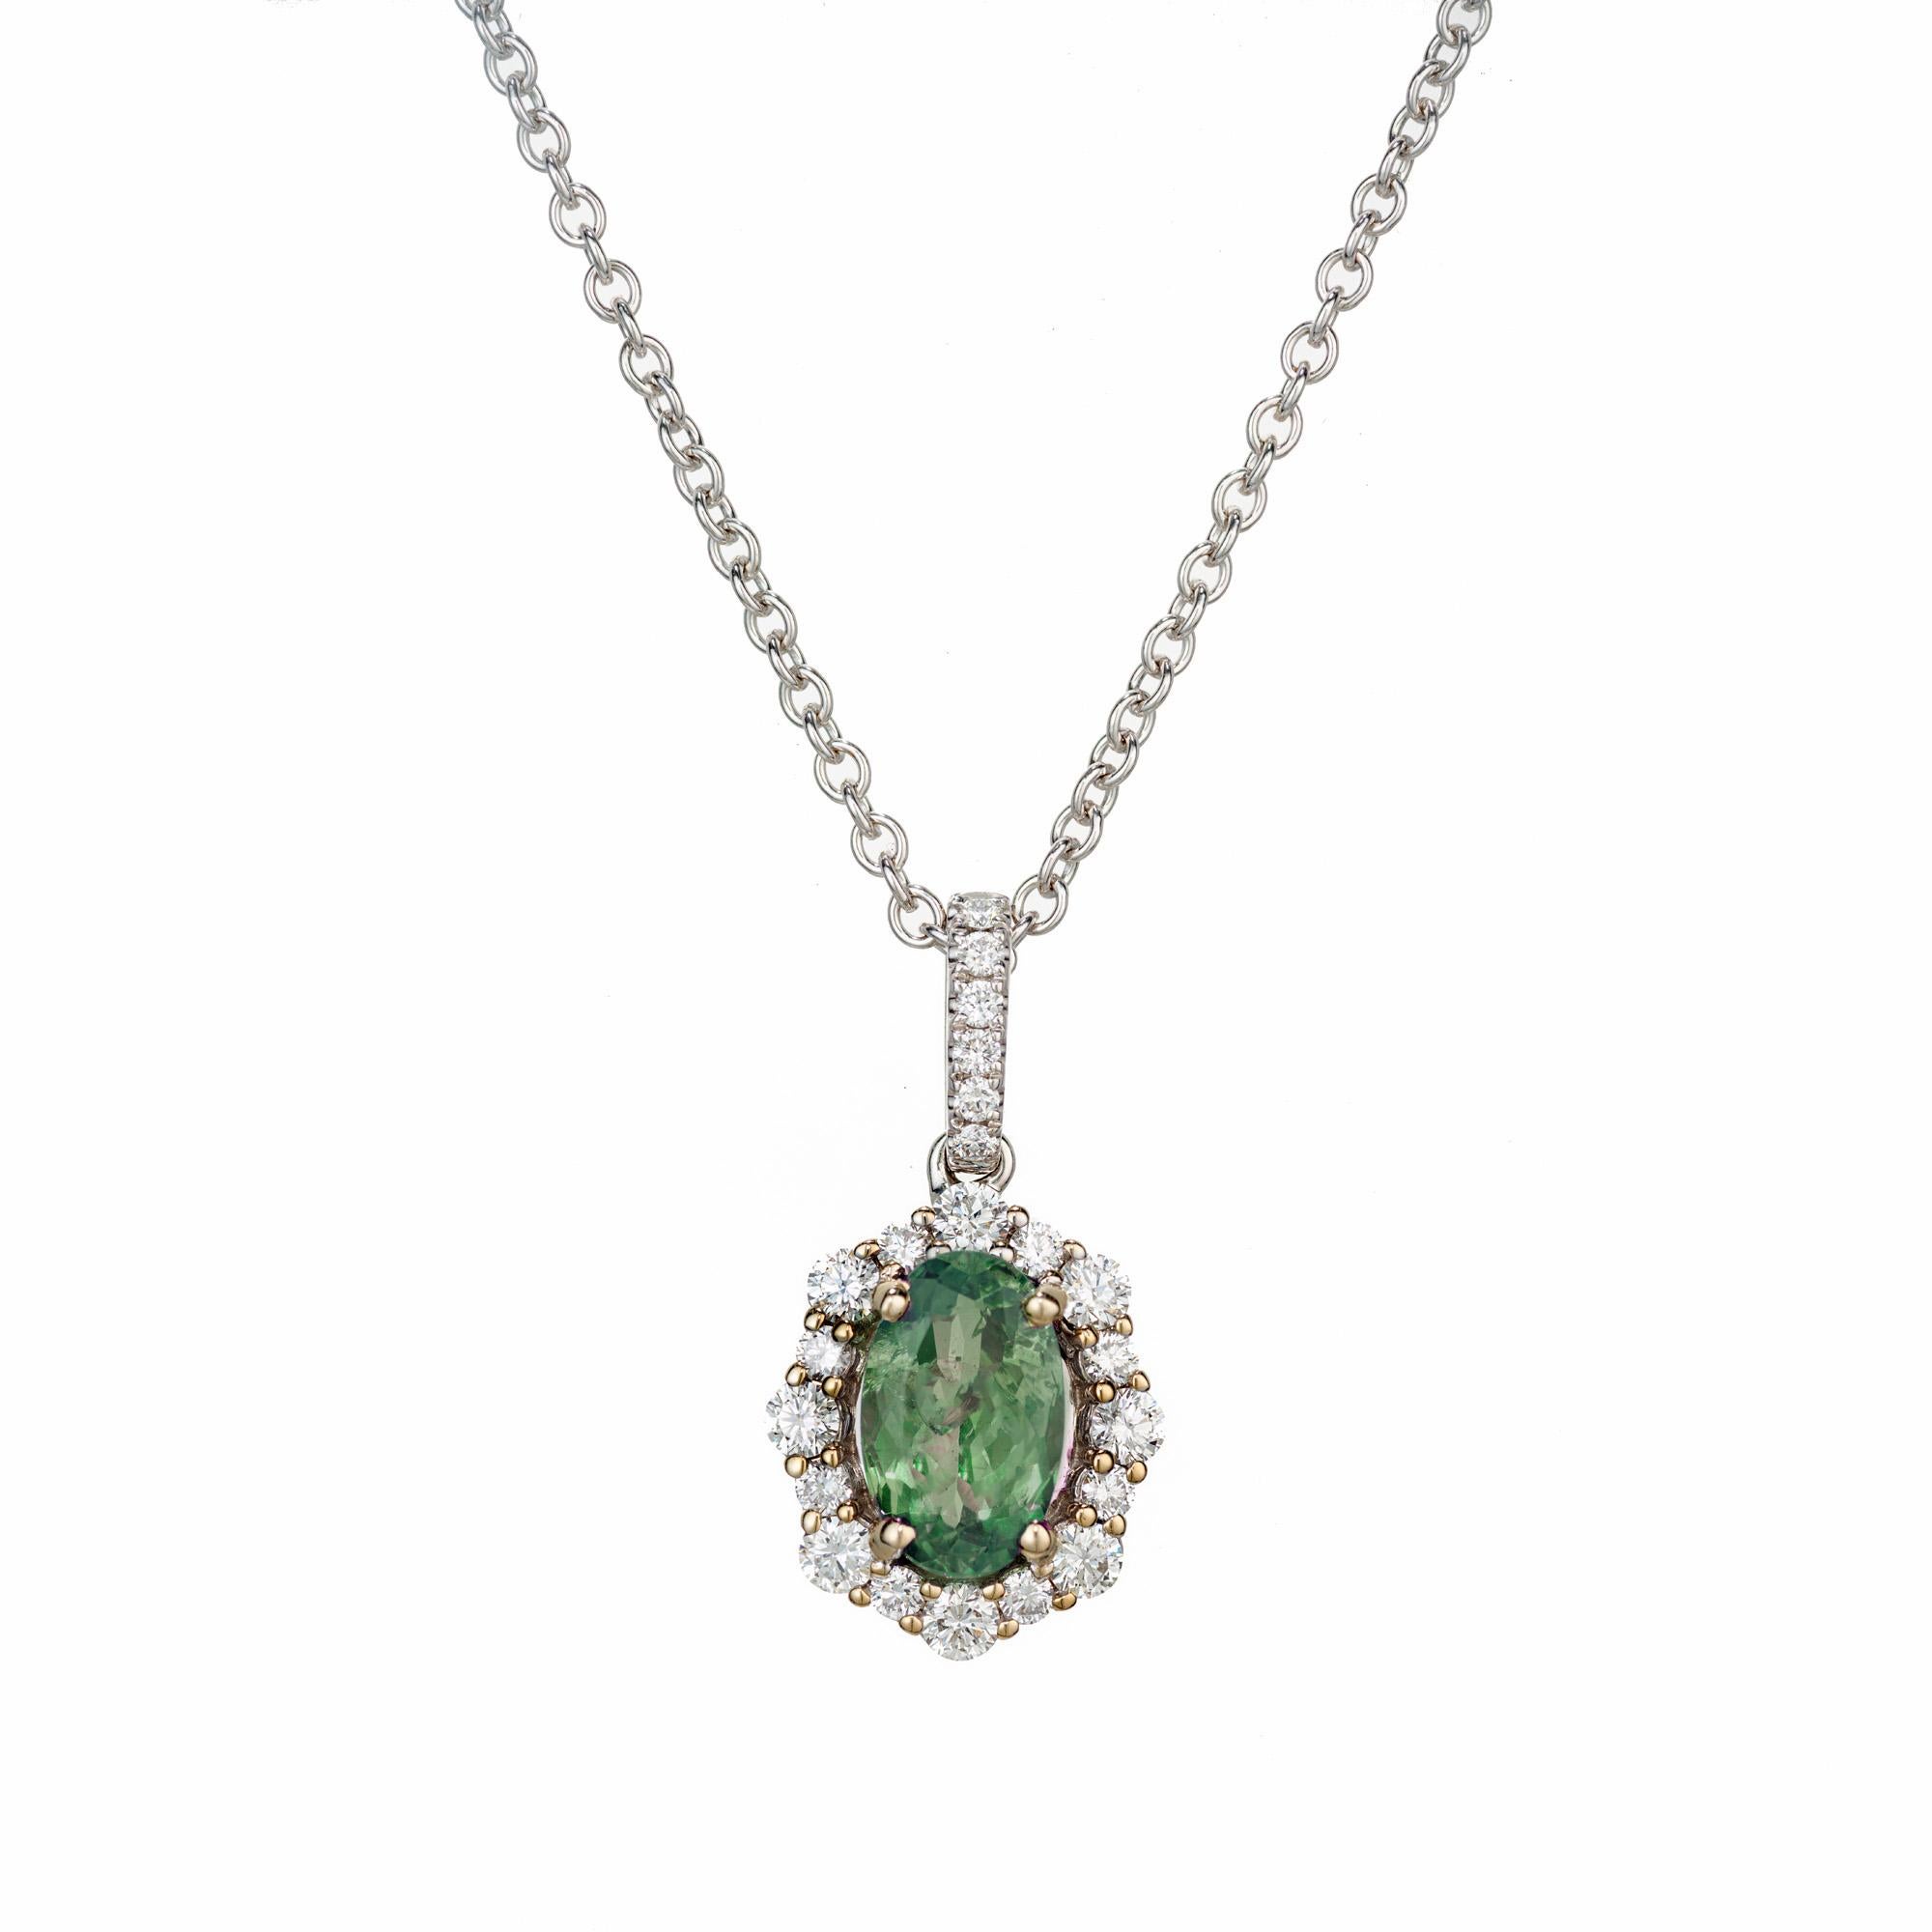 Green oval Alexandrite and diamond pendant necklace. Certified by the GIA as natural, no heat, oval shape, this 1.44ct Alexandrite is set in a 18k white gold setting with halo of round full cut white diamonds. The pendant is dangles from a 18 inch,